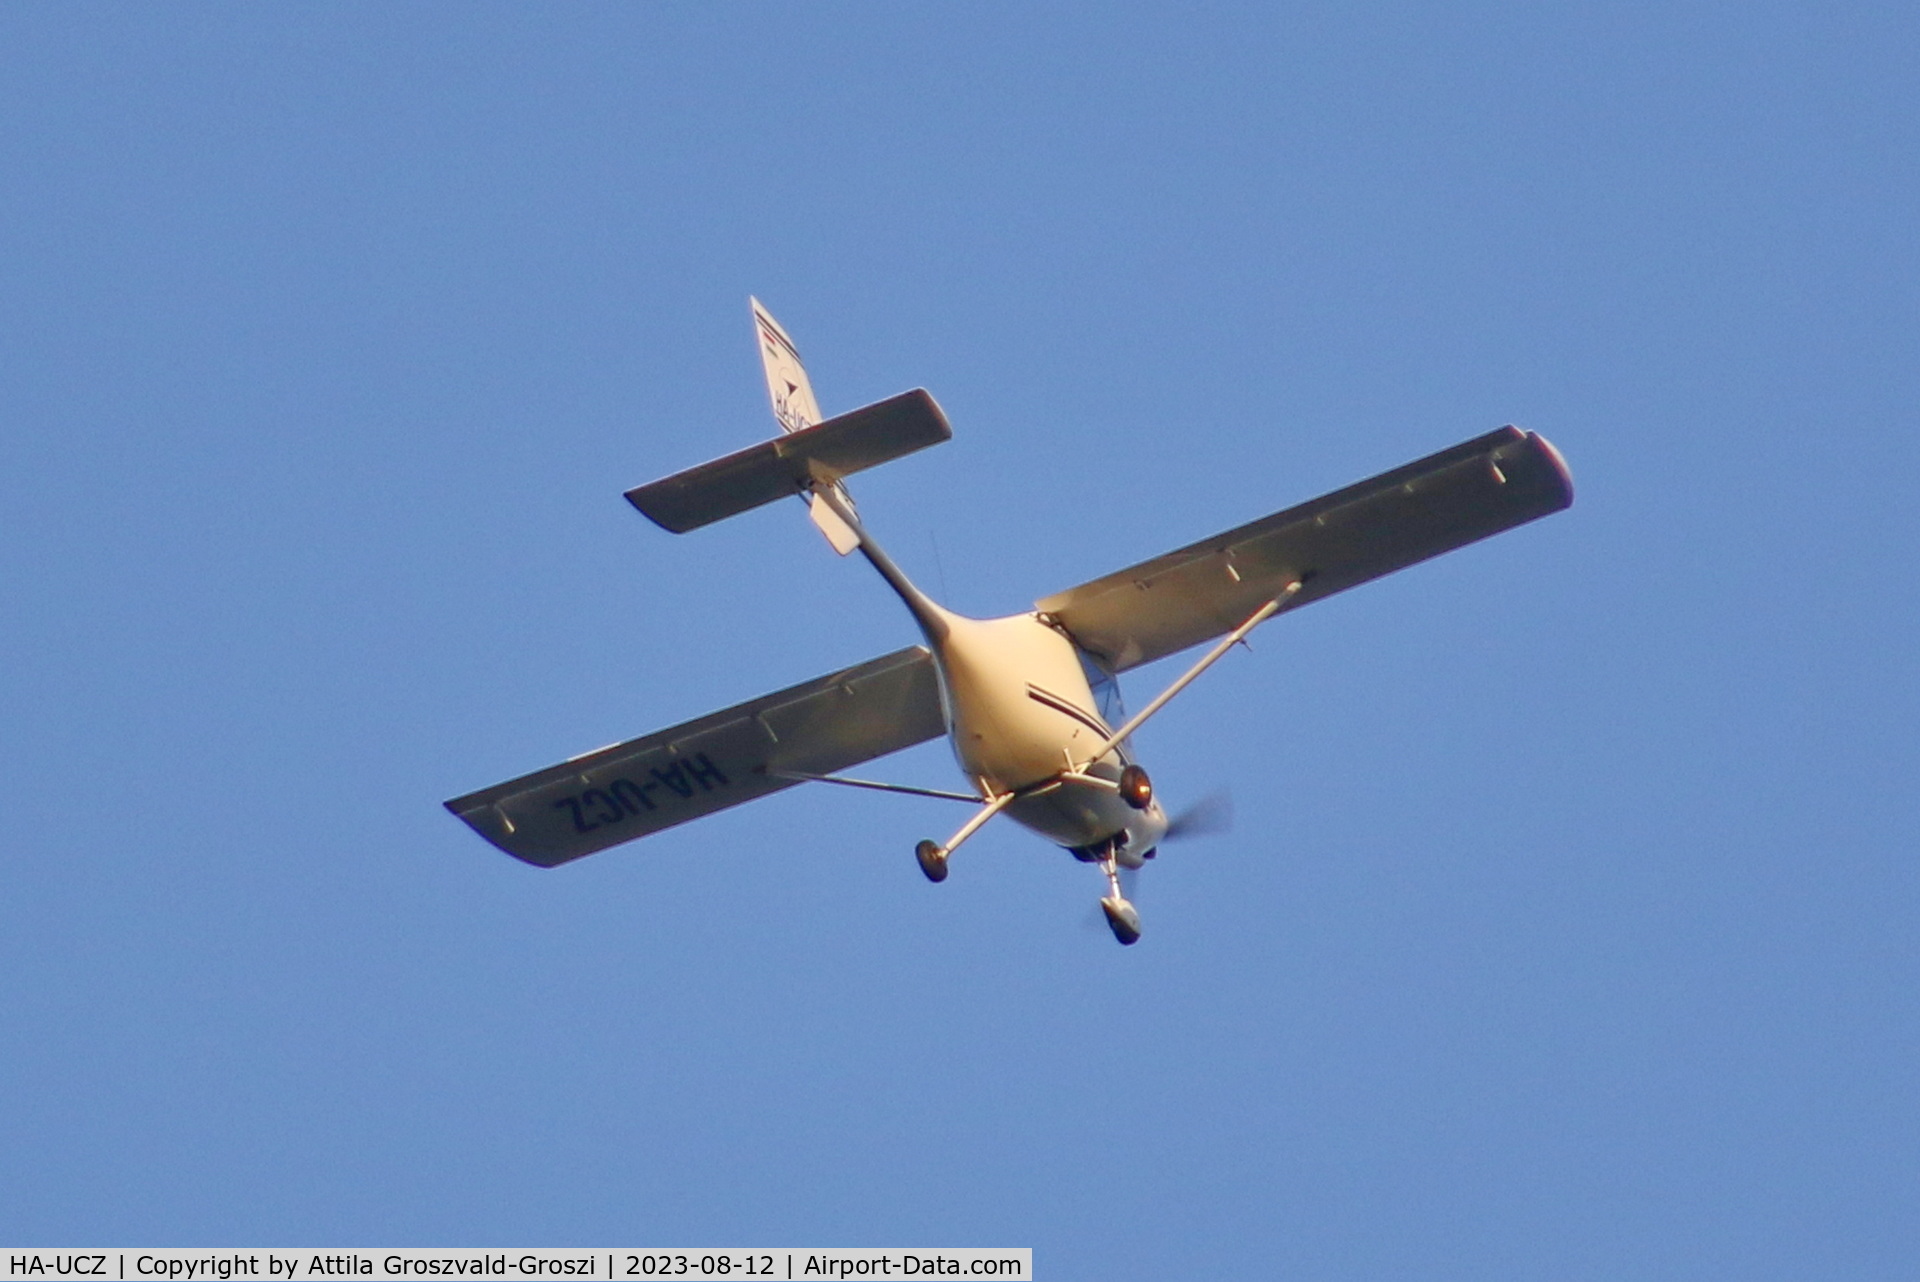 HA-UCZ, Fly Synthesis Storch C/N 350A406, In the airspace of Úrhida Airport, Hungary